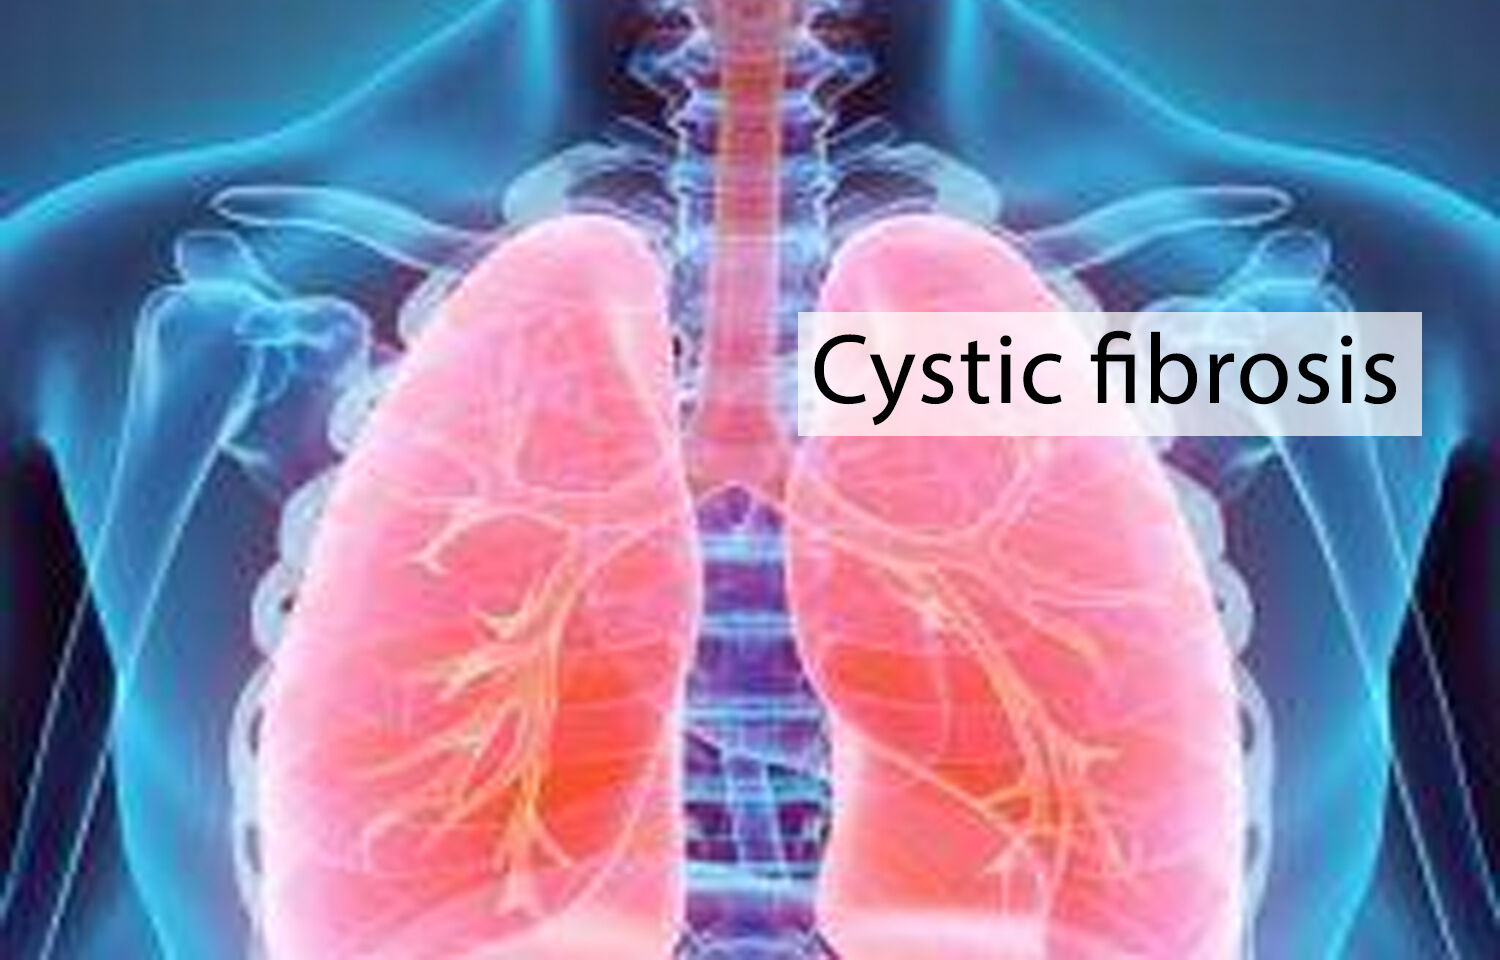 amphotericin-b-improves-key-cystic-fibrosis-biomarkers-in-clinical-study